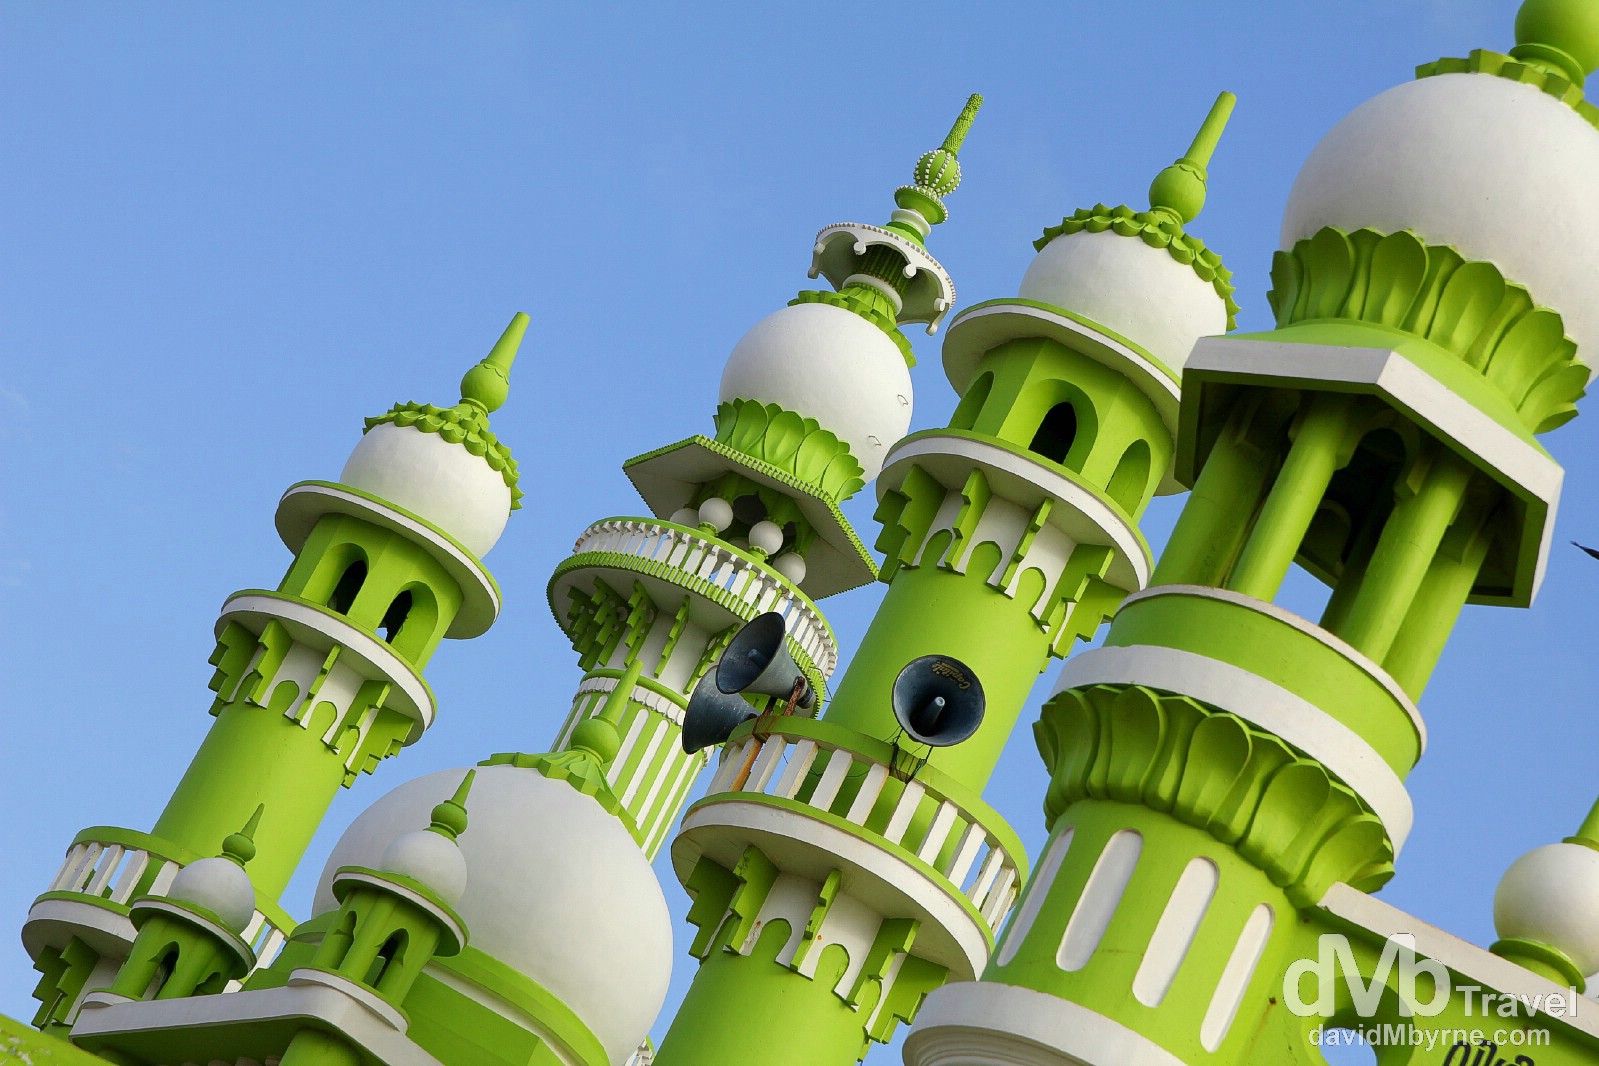 The minarets of the Darga Sherief mosque outside of Kovalam, Kerala, southwestern India. September 13th 2012.